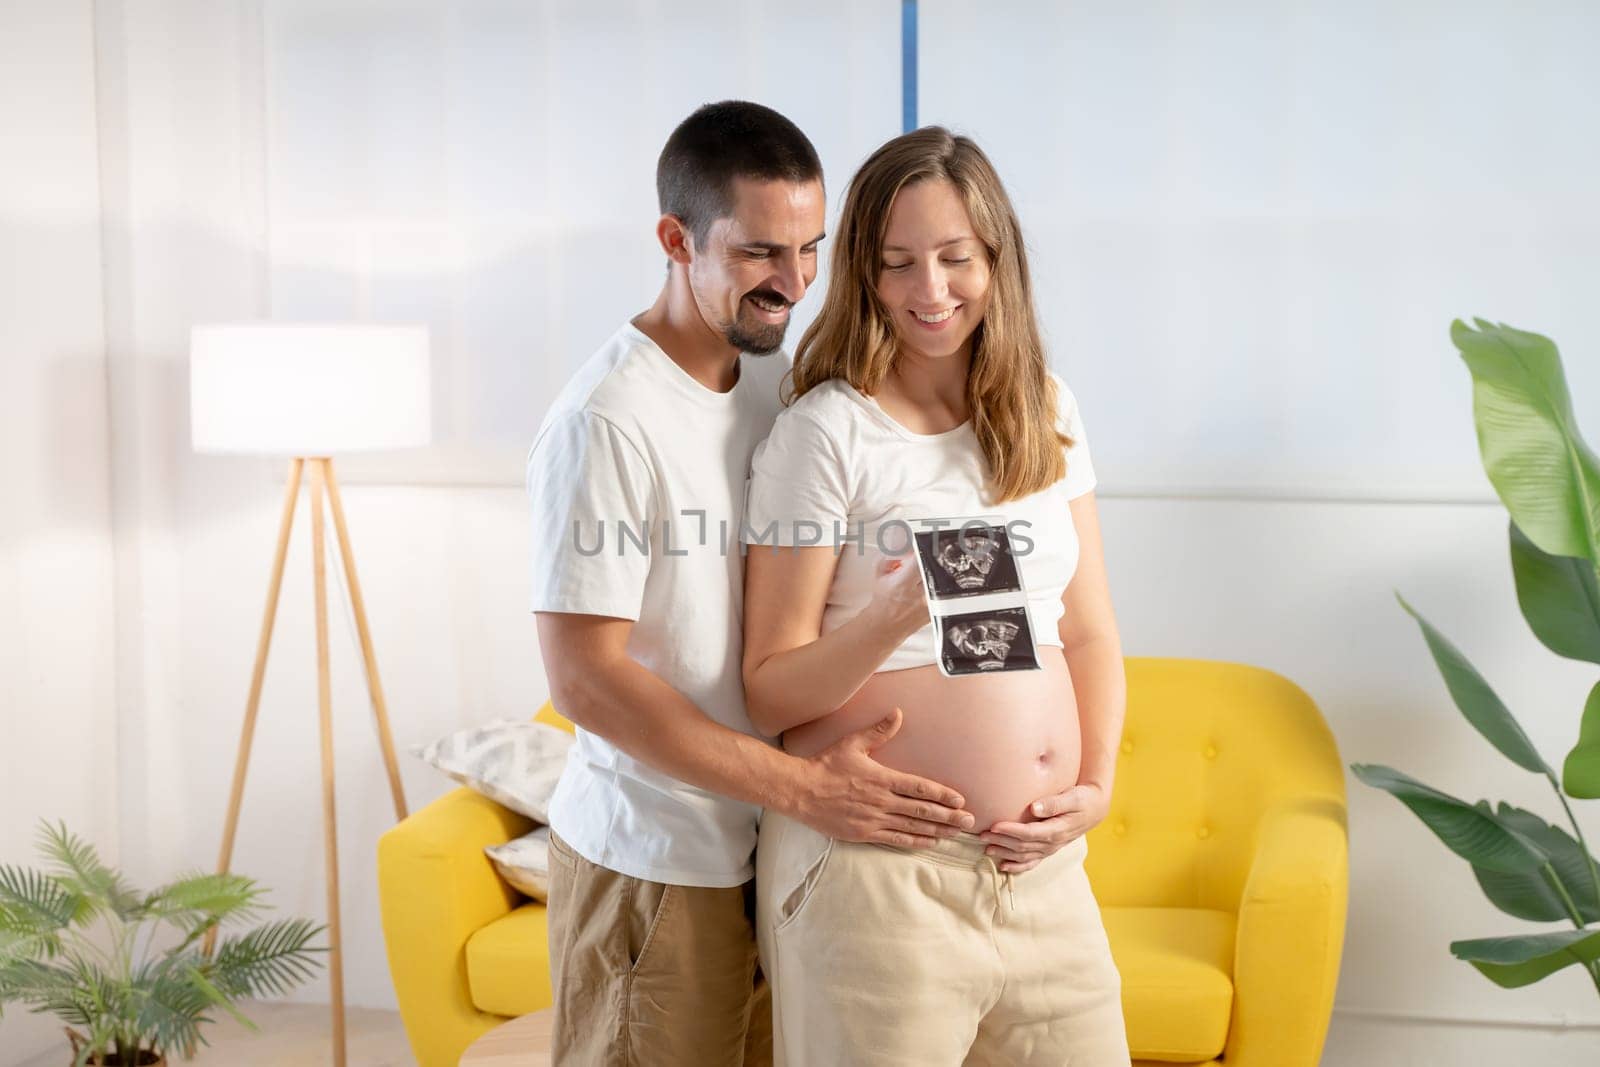 Pregnancy couple hugging looking picture of ultrasound, smiling happily touching belly by PaulCarr